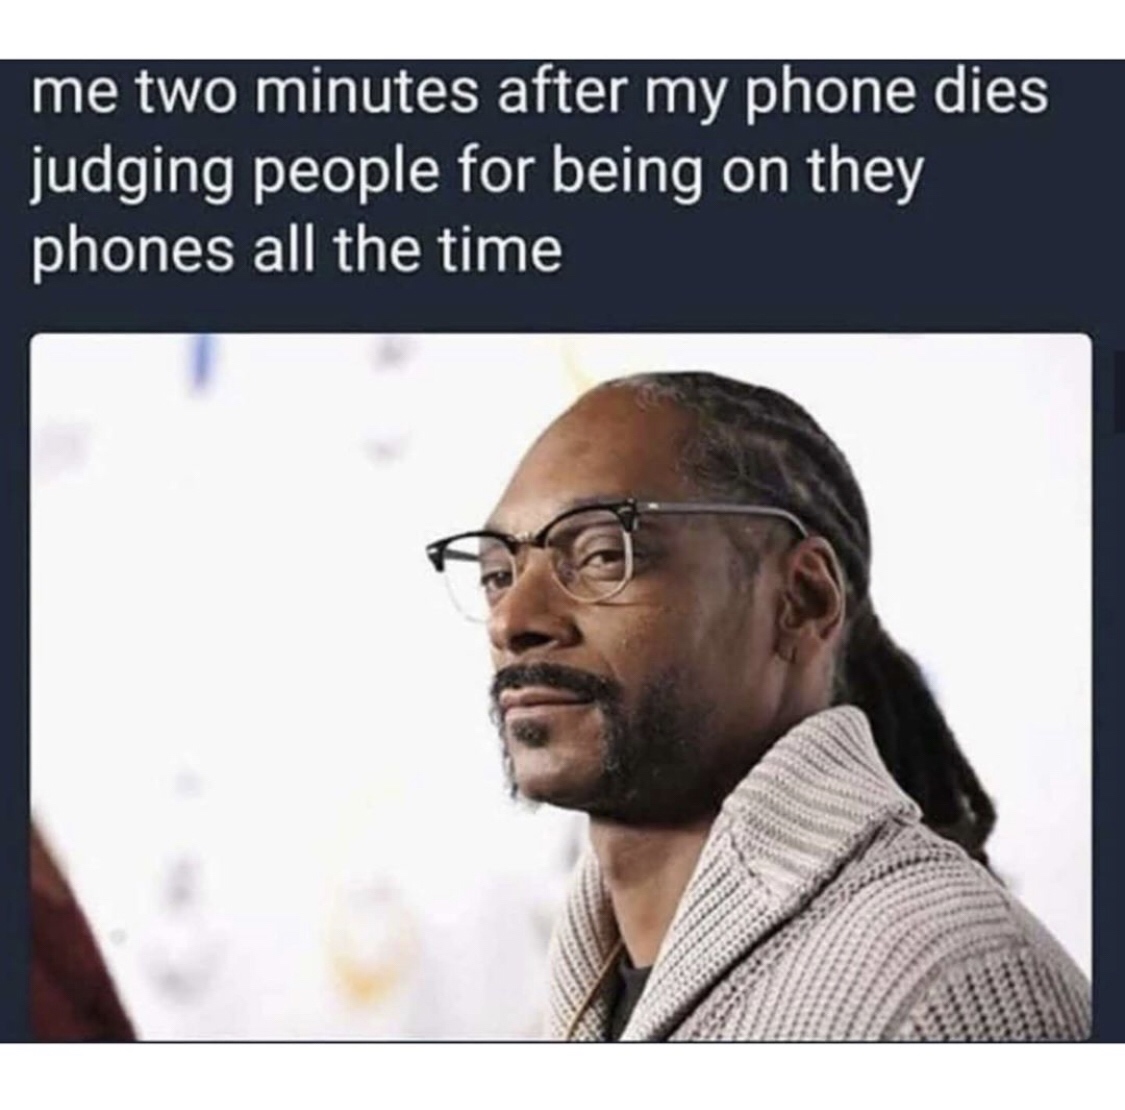 old is snoop dogg - me two minutes after my phone dies judging people for being on they phones all the time